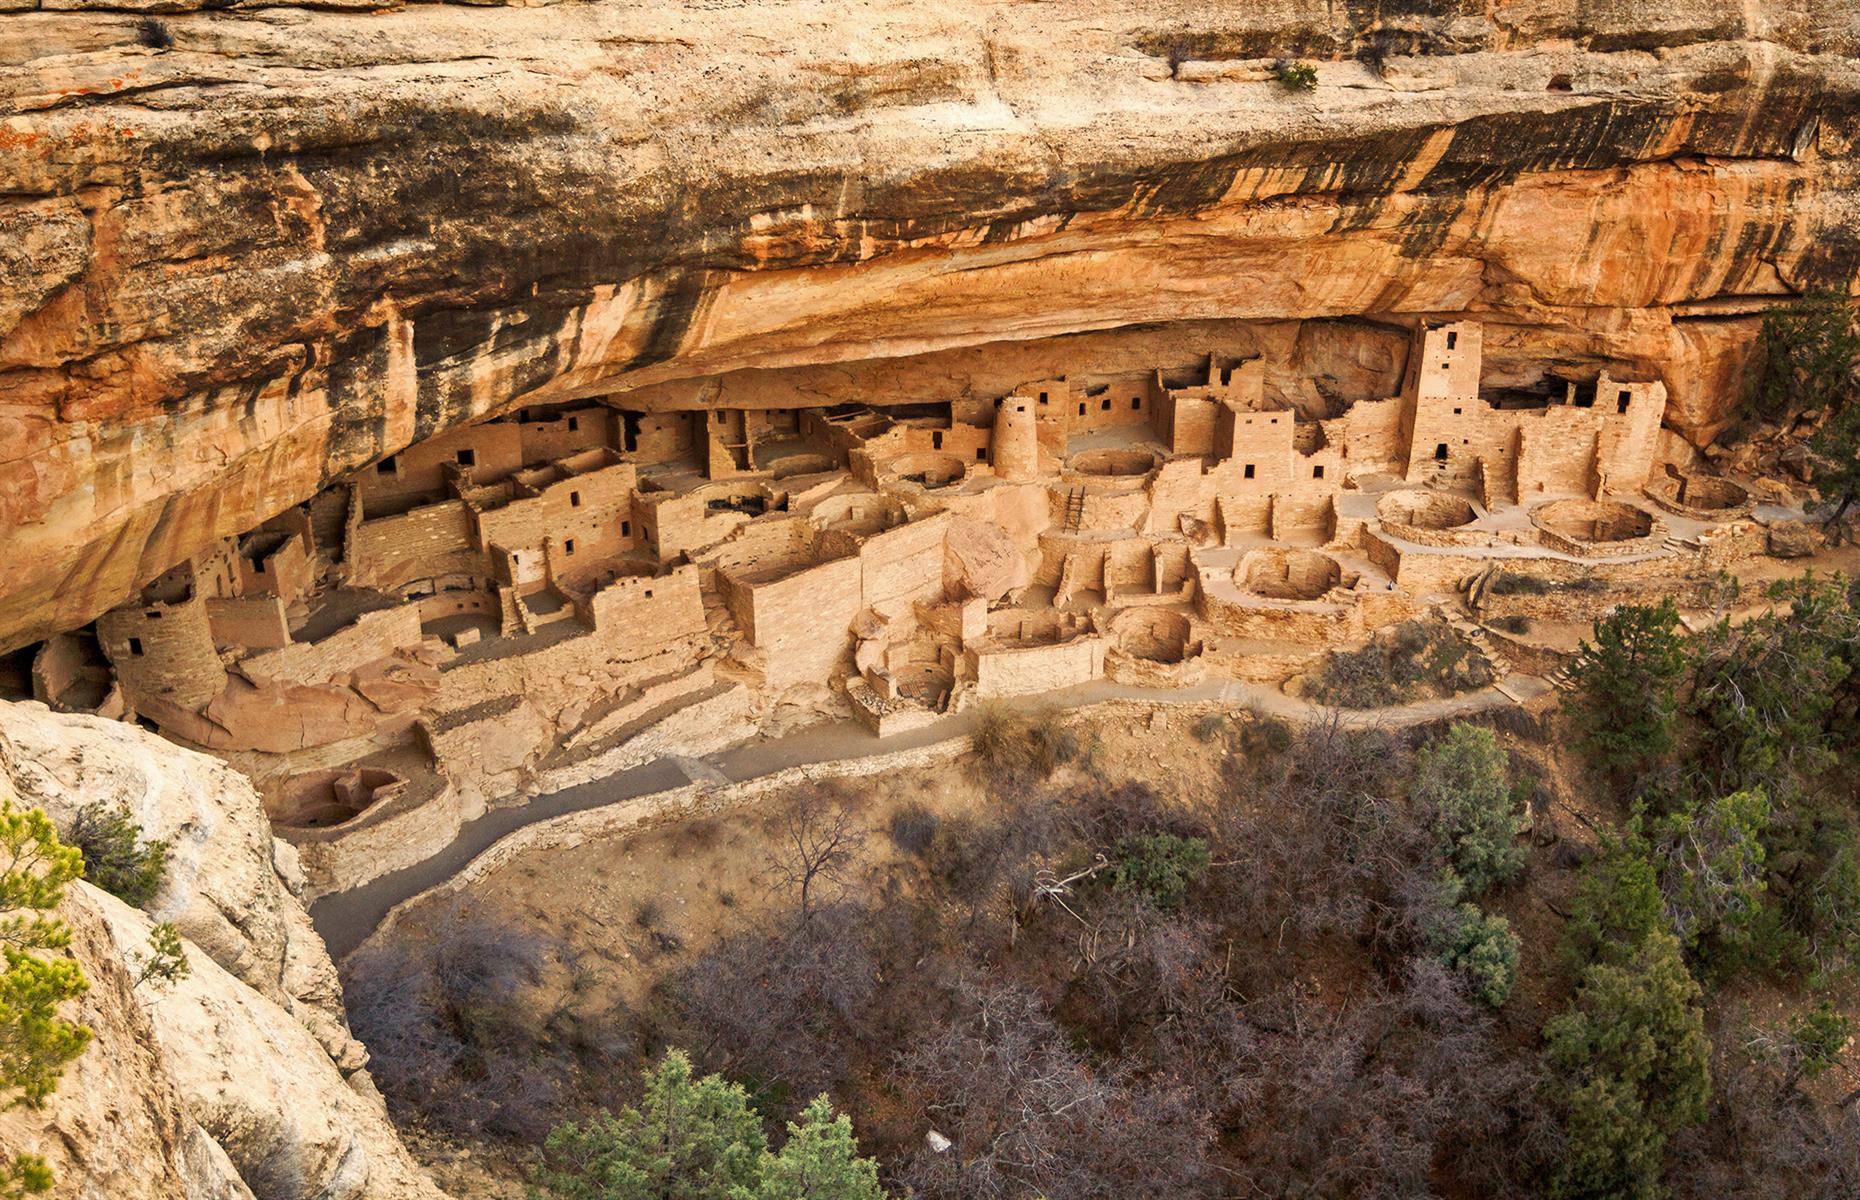 A UNESCO World Heritage Site and Dark Sky Reserve, this national park has a lot to preserve. If you visit, make sure you see the incredible homes carved into and built around the rocky, sandstone landscape. Dating back to around AD 550, these dwellings housed the Ancestral Puebloans who lived in this region for more than 700 years, and there are 5,000 or so archaeological sites to explore within the national park.